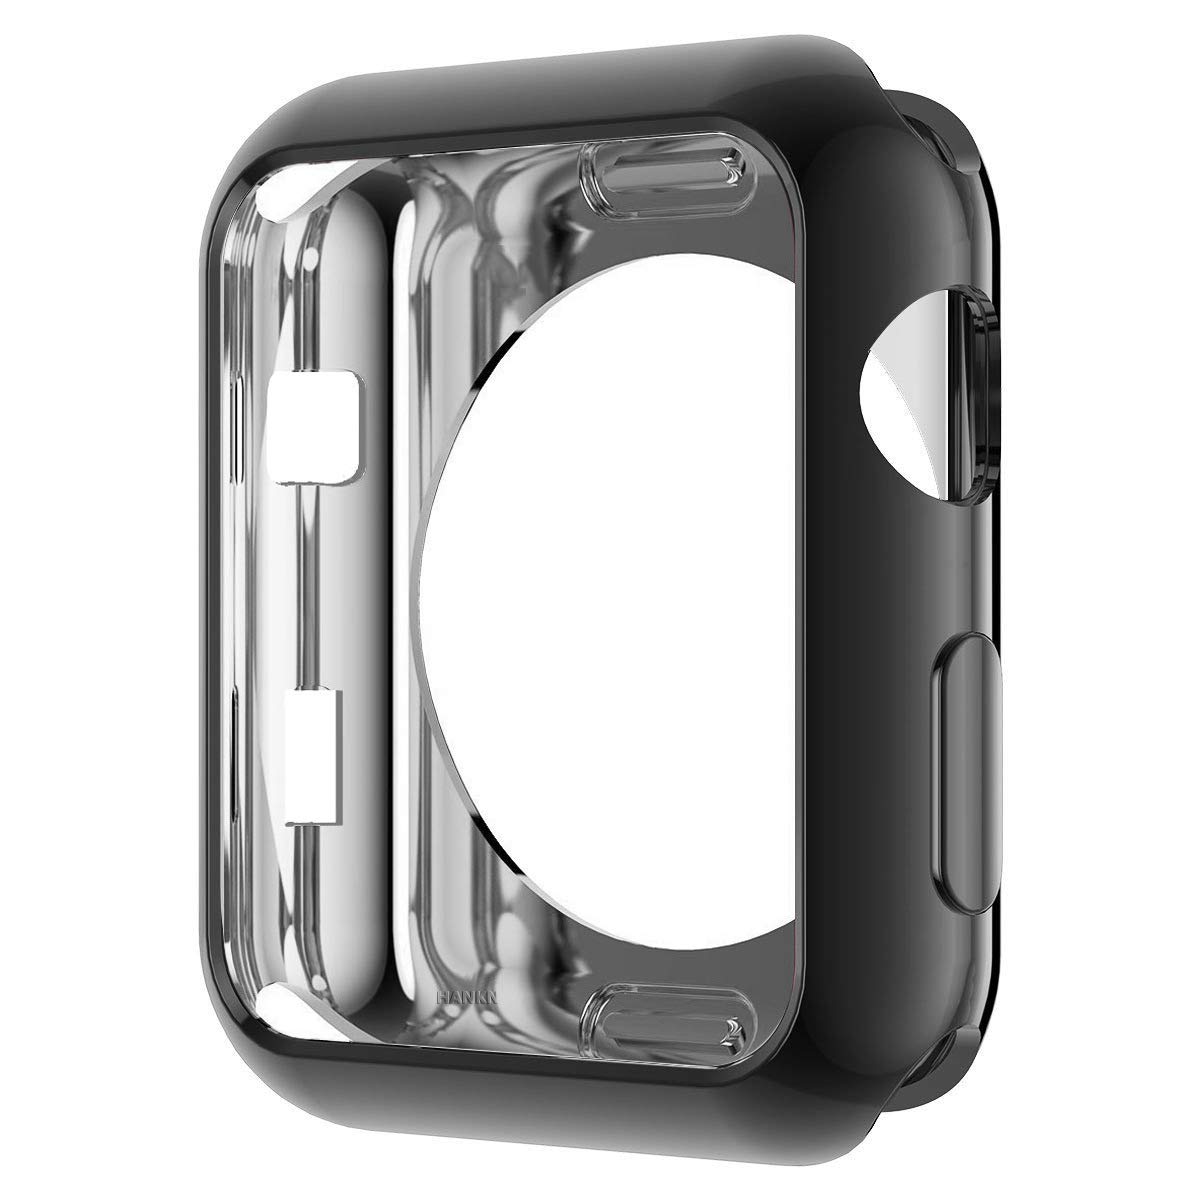 Hankn For Apple Watch Series 3 2 1 Case, Soft Tpu Plated Shiny Cover Iwatch Bumper No Front Screen Protector] (38Mm, Black)